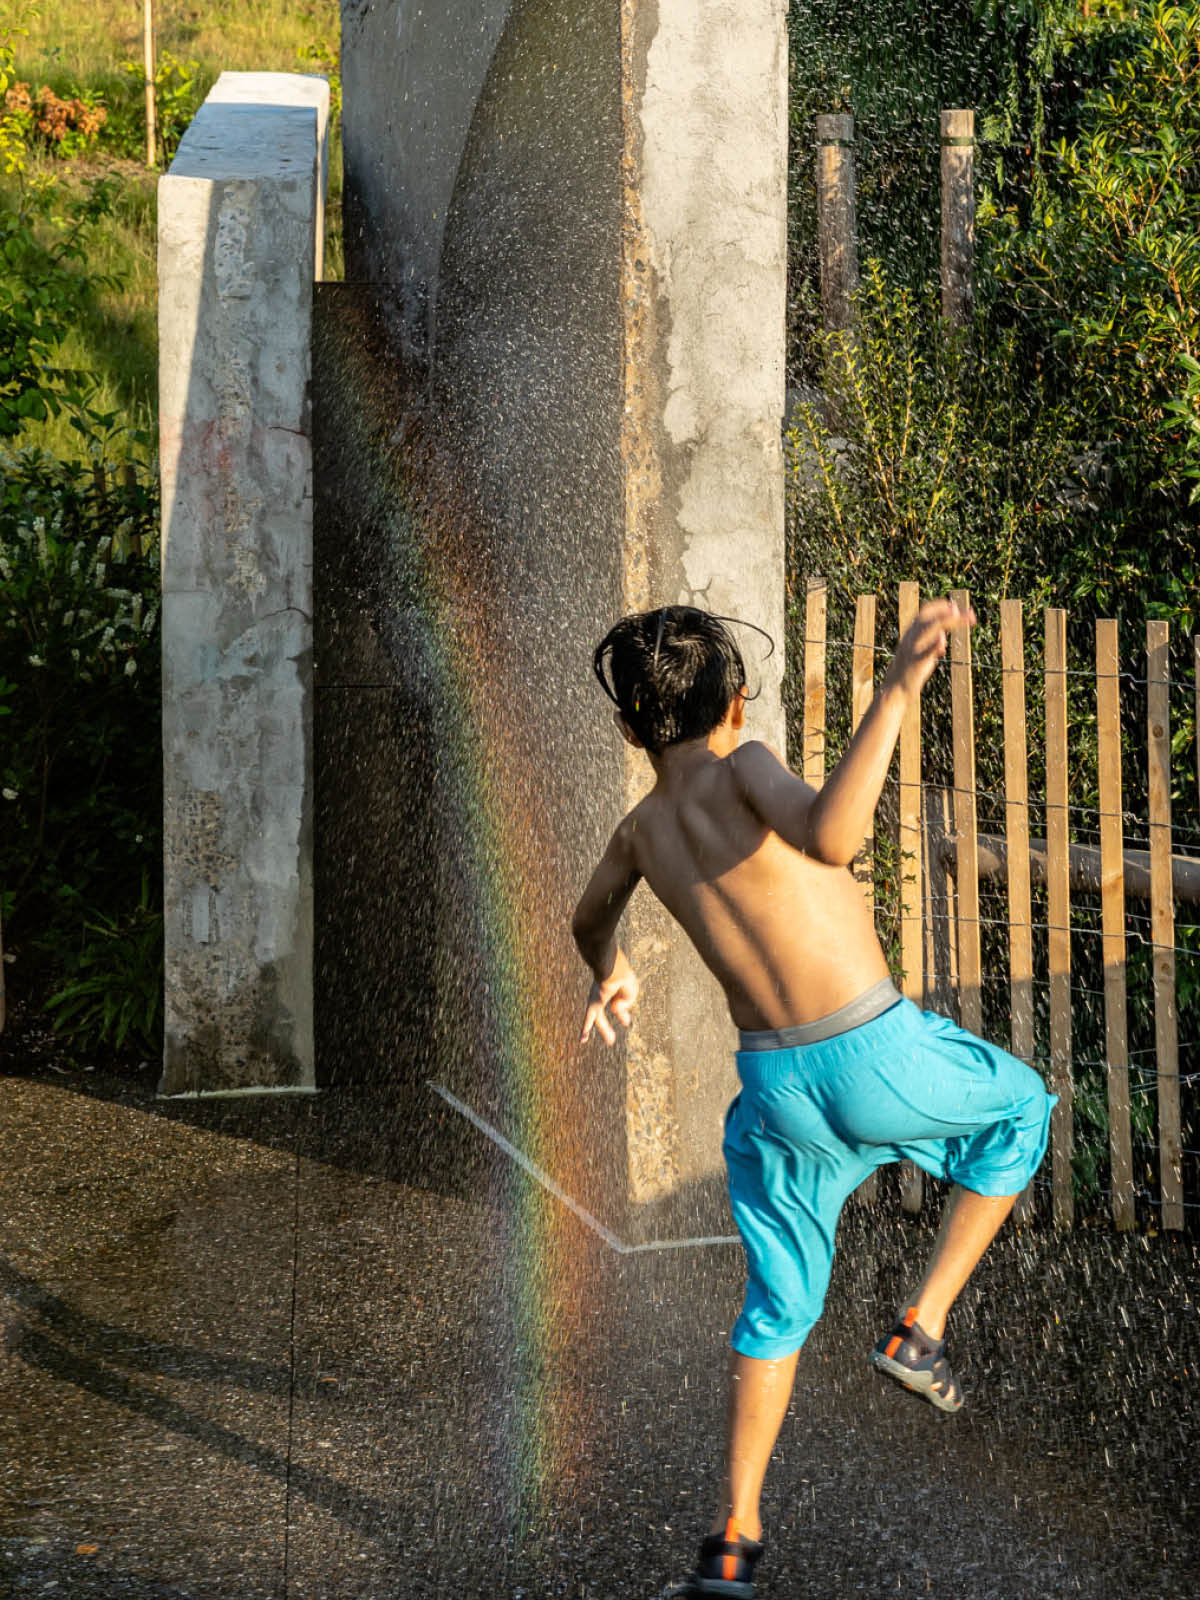 Young boy playing in the spray at a water area on a sunny day.